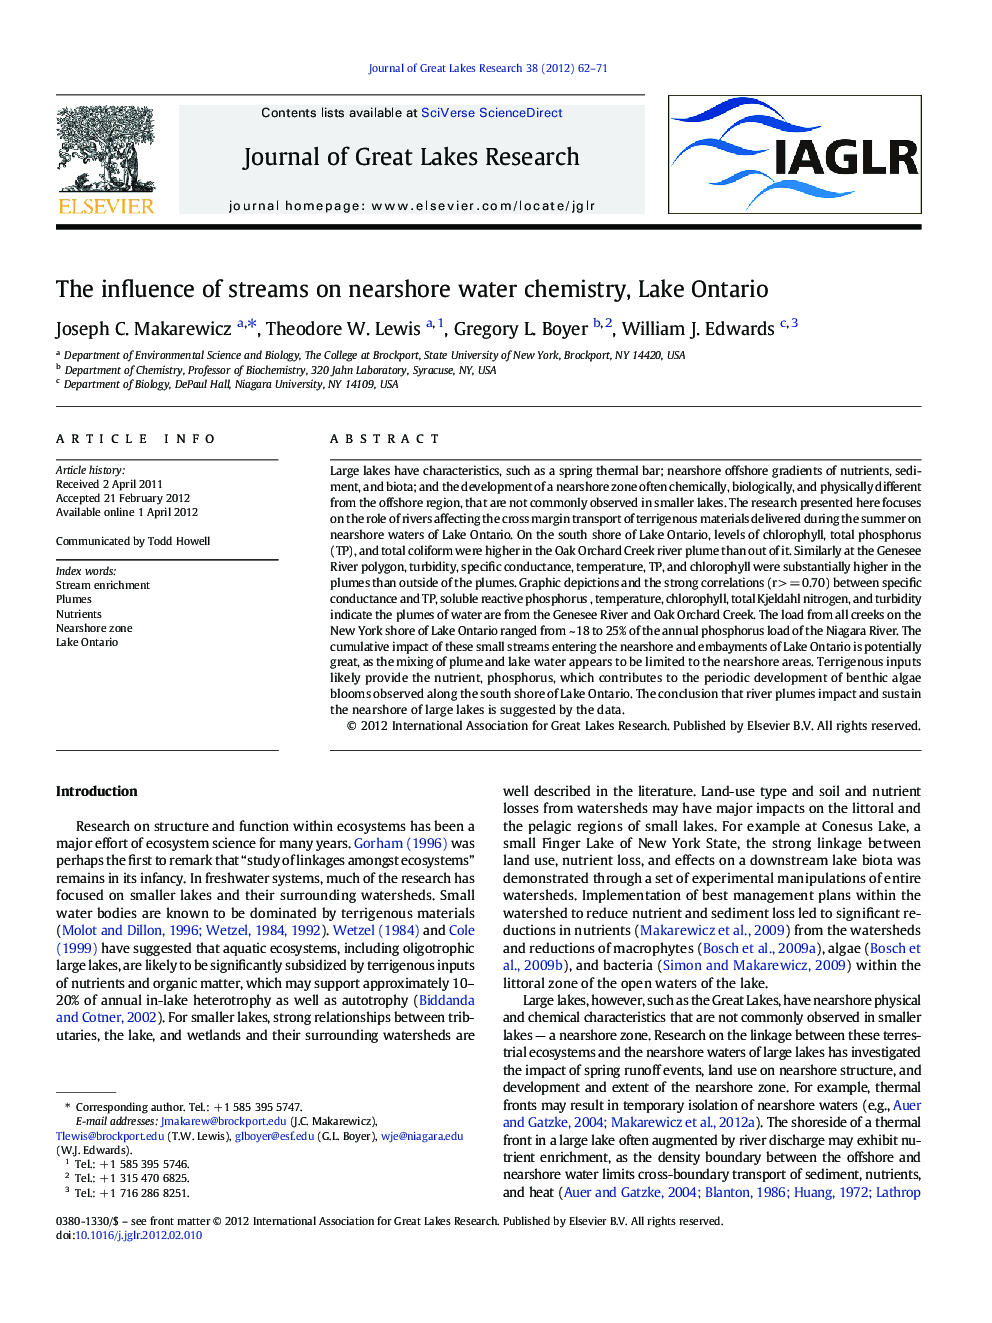 The influence of streams on nearshore water chemistry, Lake Ontario